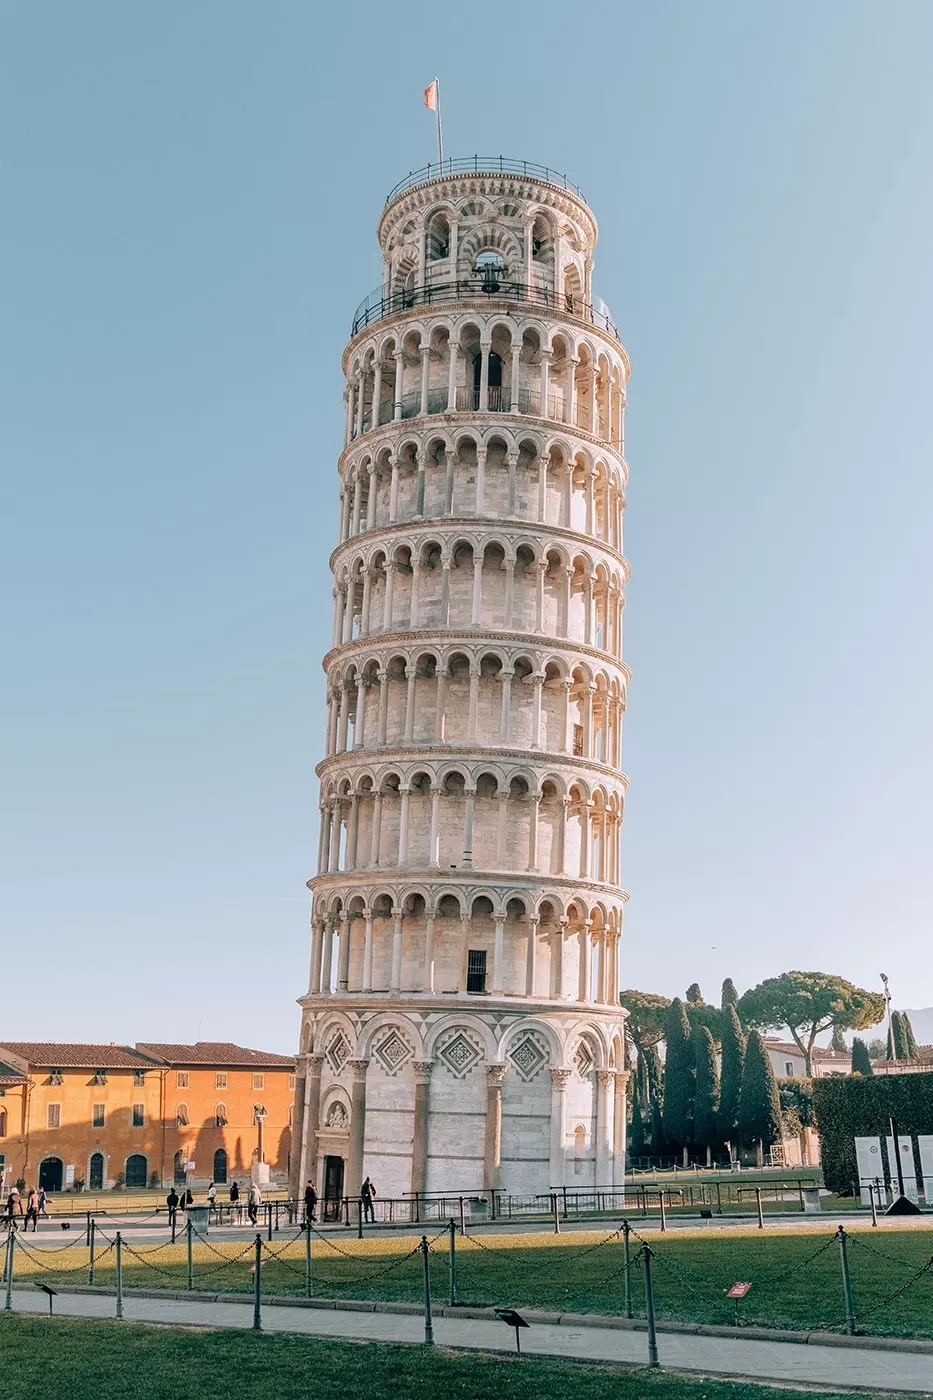 Things to do in Pisa Italy - Piazza dei Miracoli - Leaning Tower of Pisa early morning